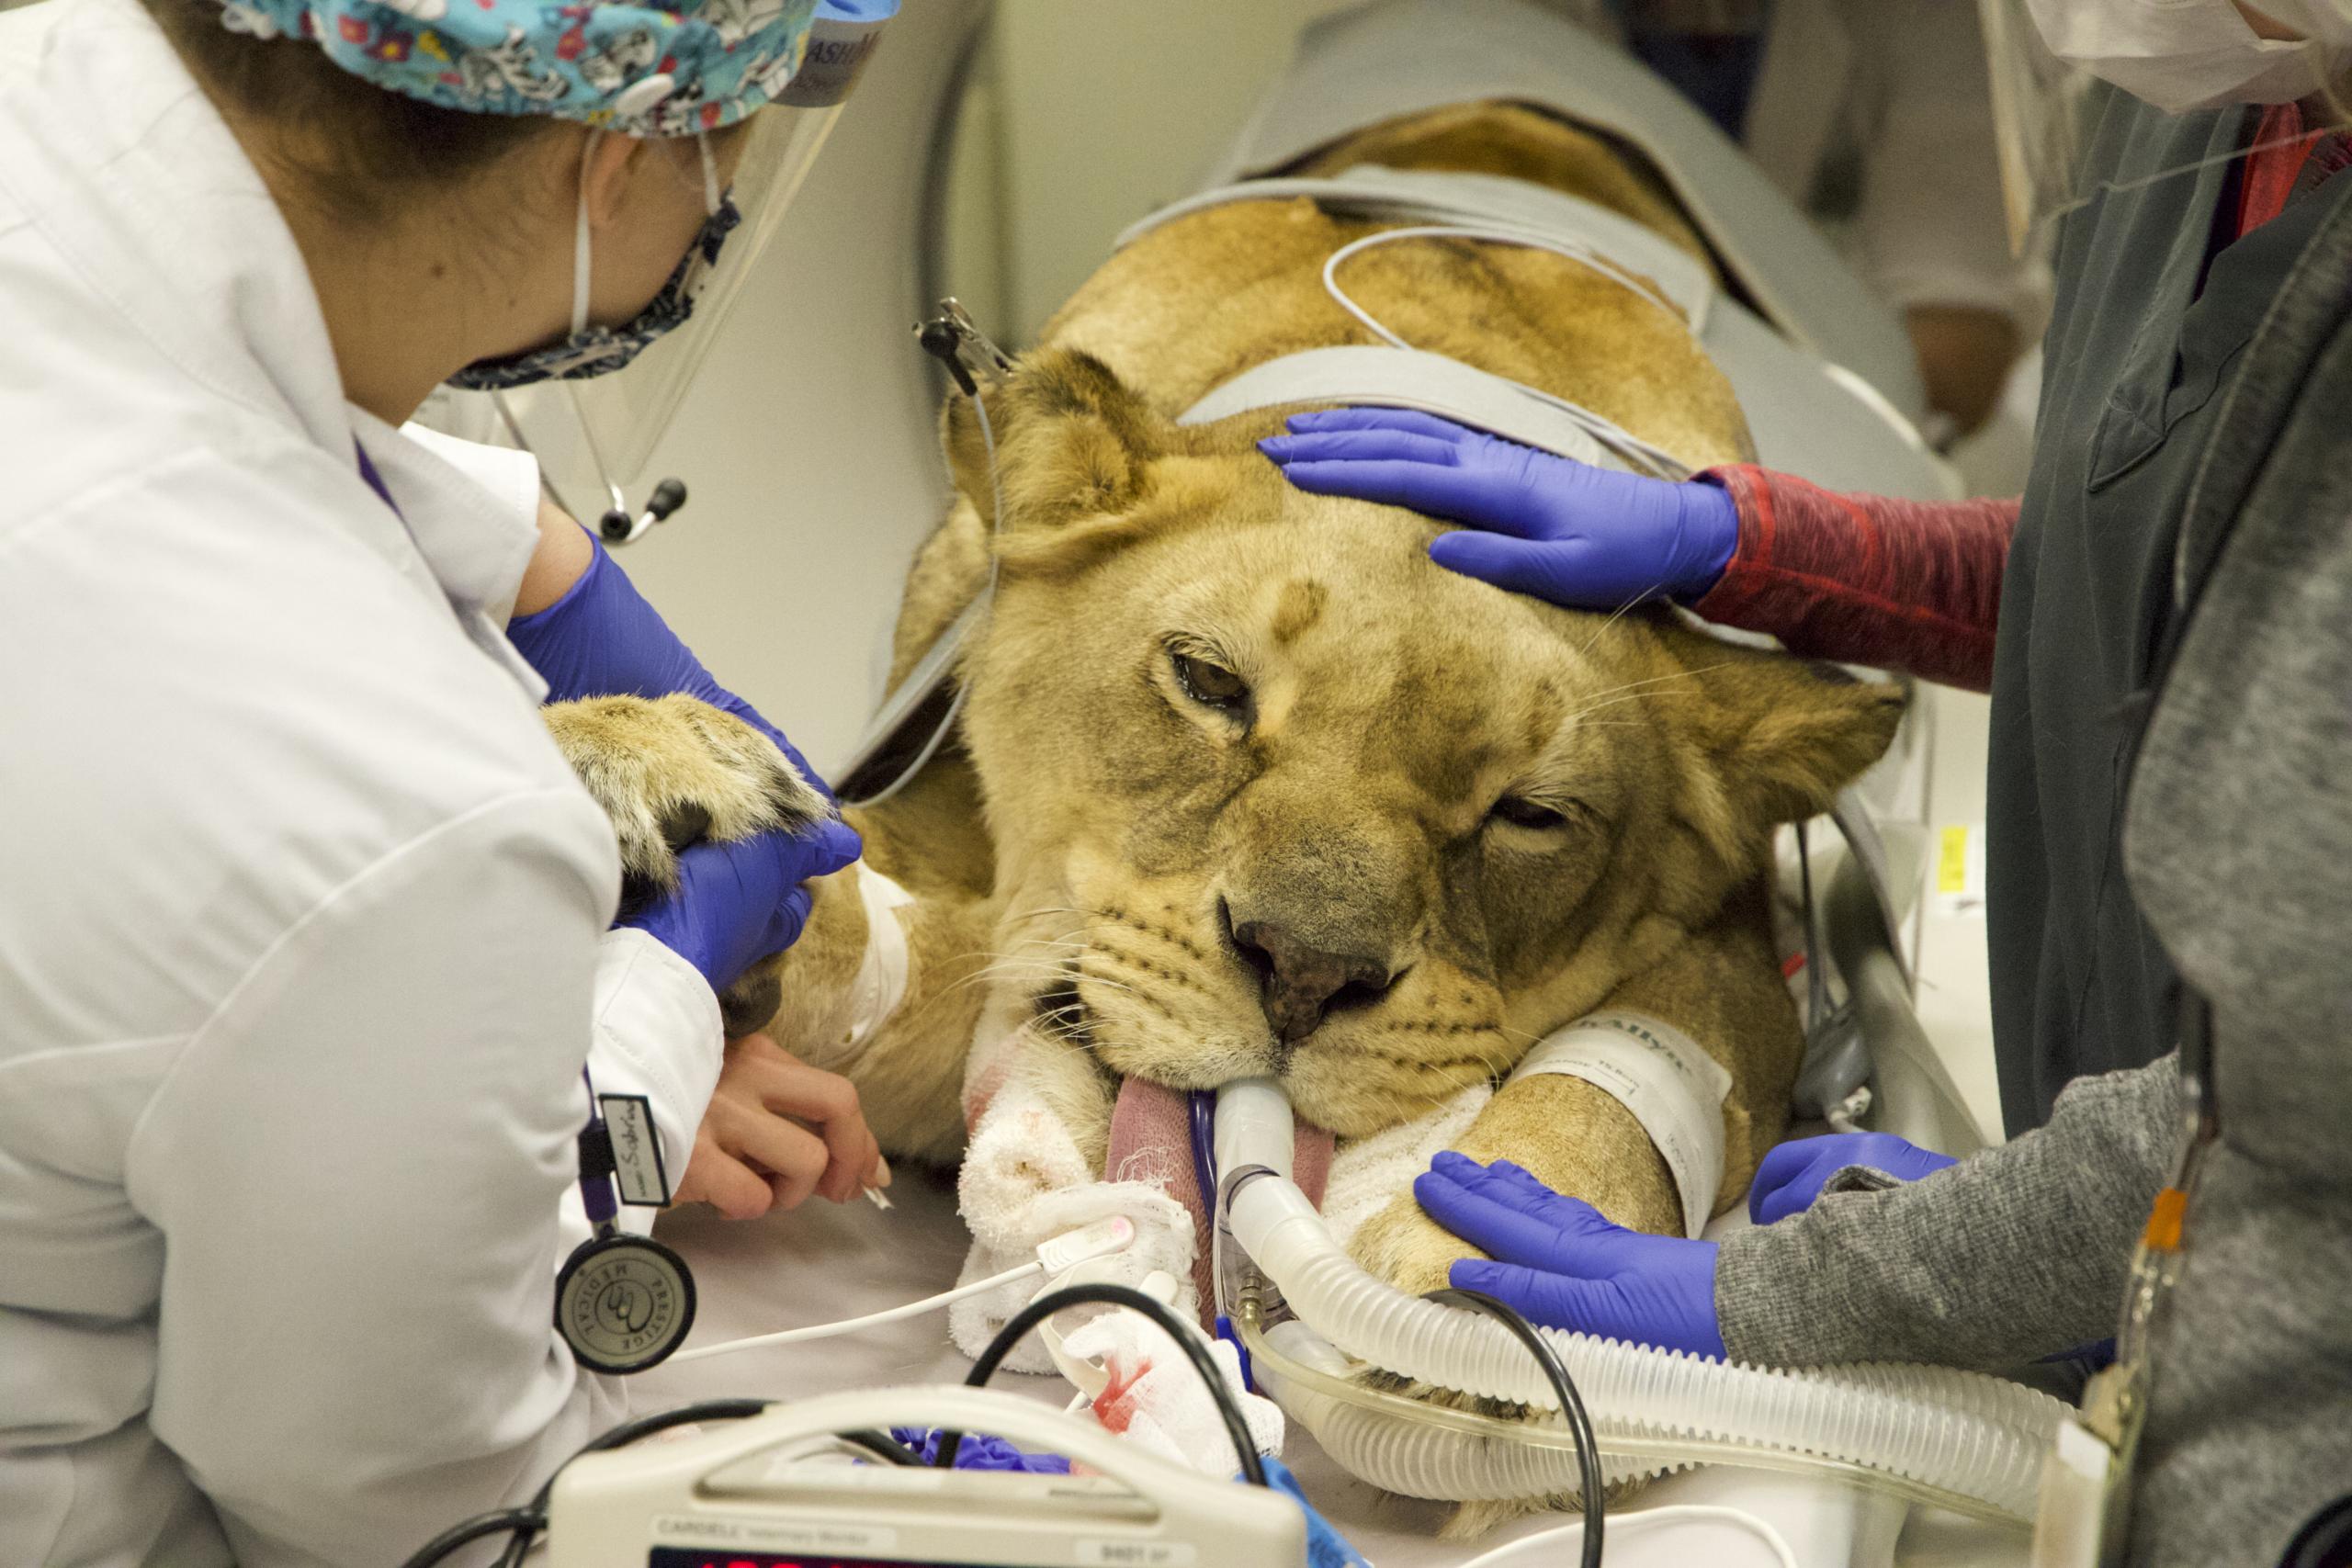 Chobe the lioness, who was rescued from “Tiger King” Joe Exotic’s Oklahoma facility in 2018 and now lives at the WildCat Ridge Sanctuary in Scotts Mills, was brought in for a CT scan at the Lois Bates Acheson Veterinary Teaching Hospital at Oregon State University.